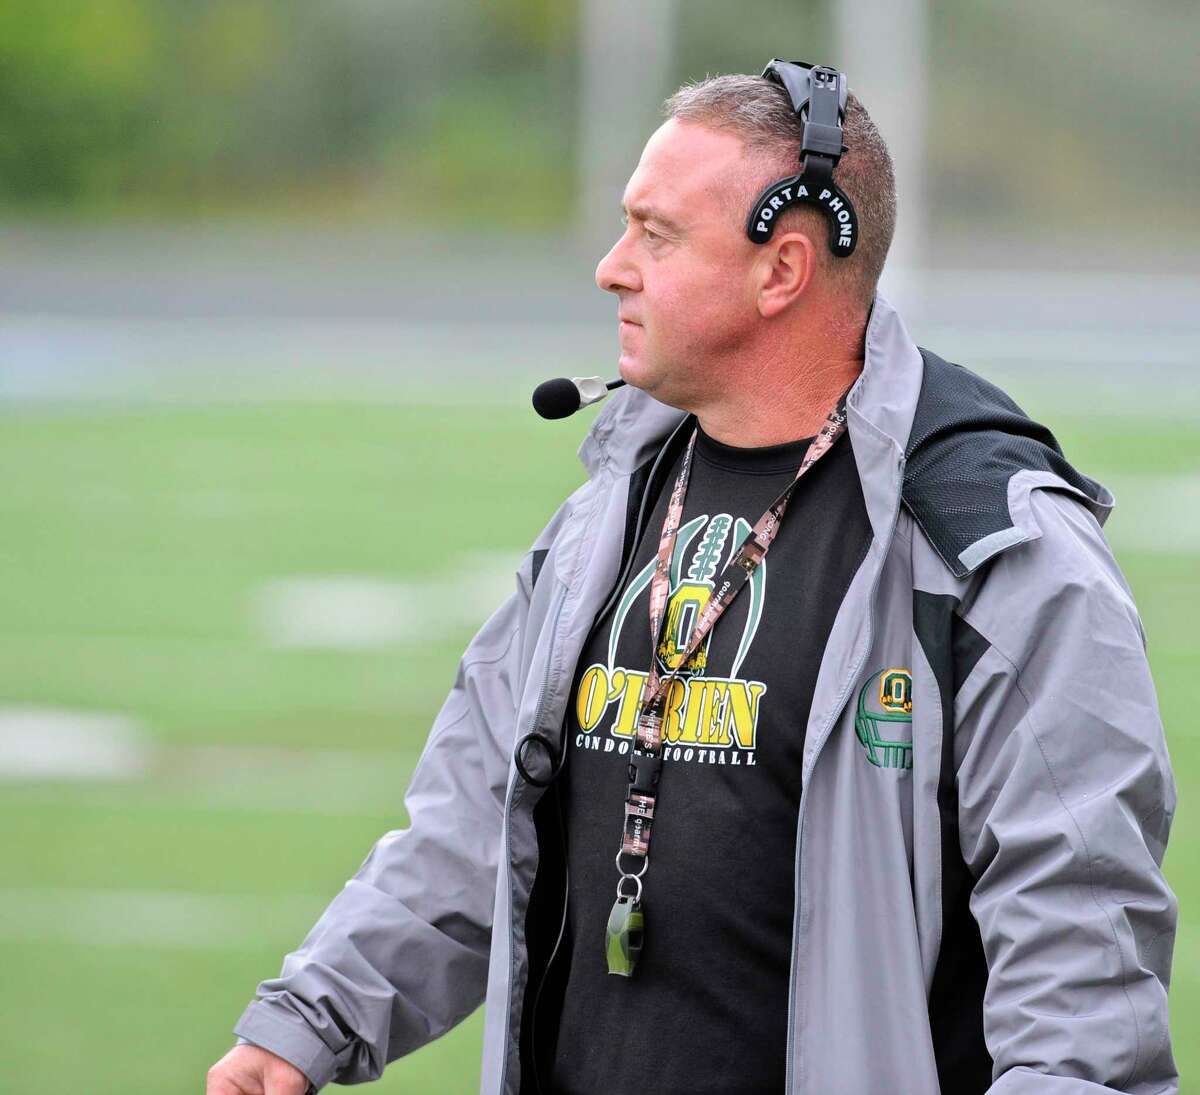 O'Brien Tech head coach Nick Aprea during the high school football game between O'Brien Tech and ATI United on Saturday afternoon, October 1, 2016, at Immaculate High School, Danbury, Conn.